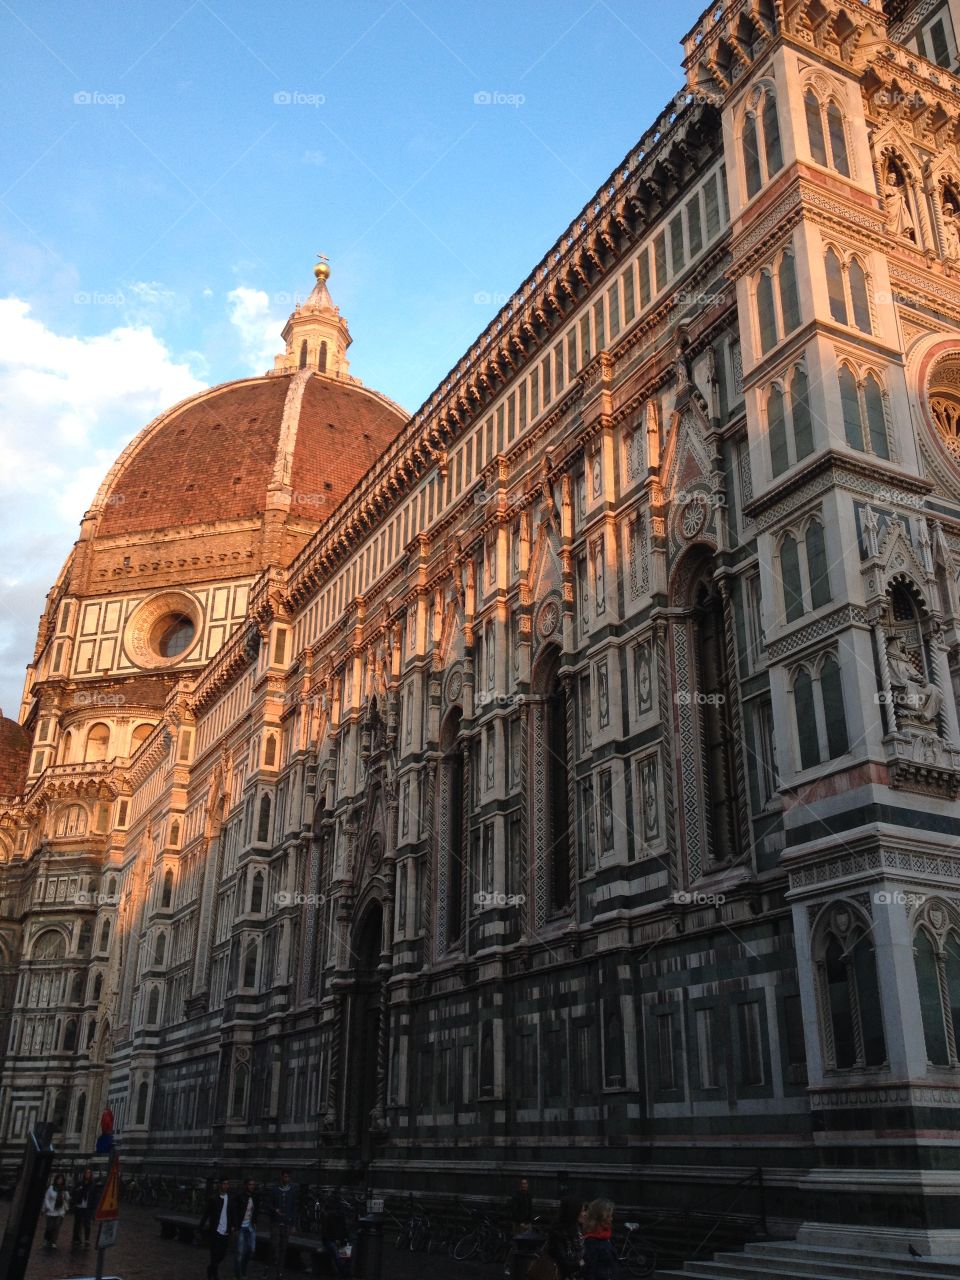 The Duomo in Florence, Italy 